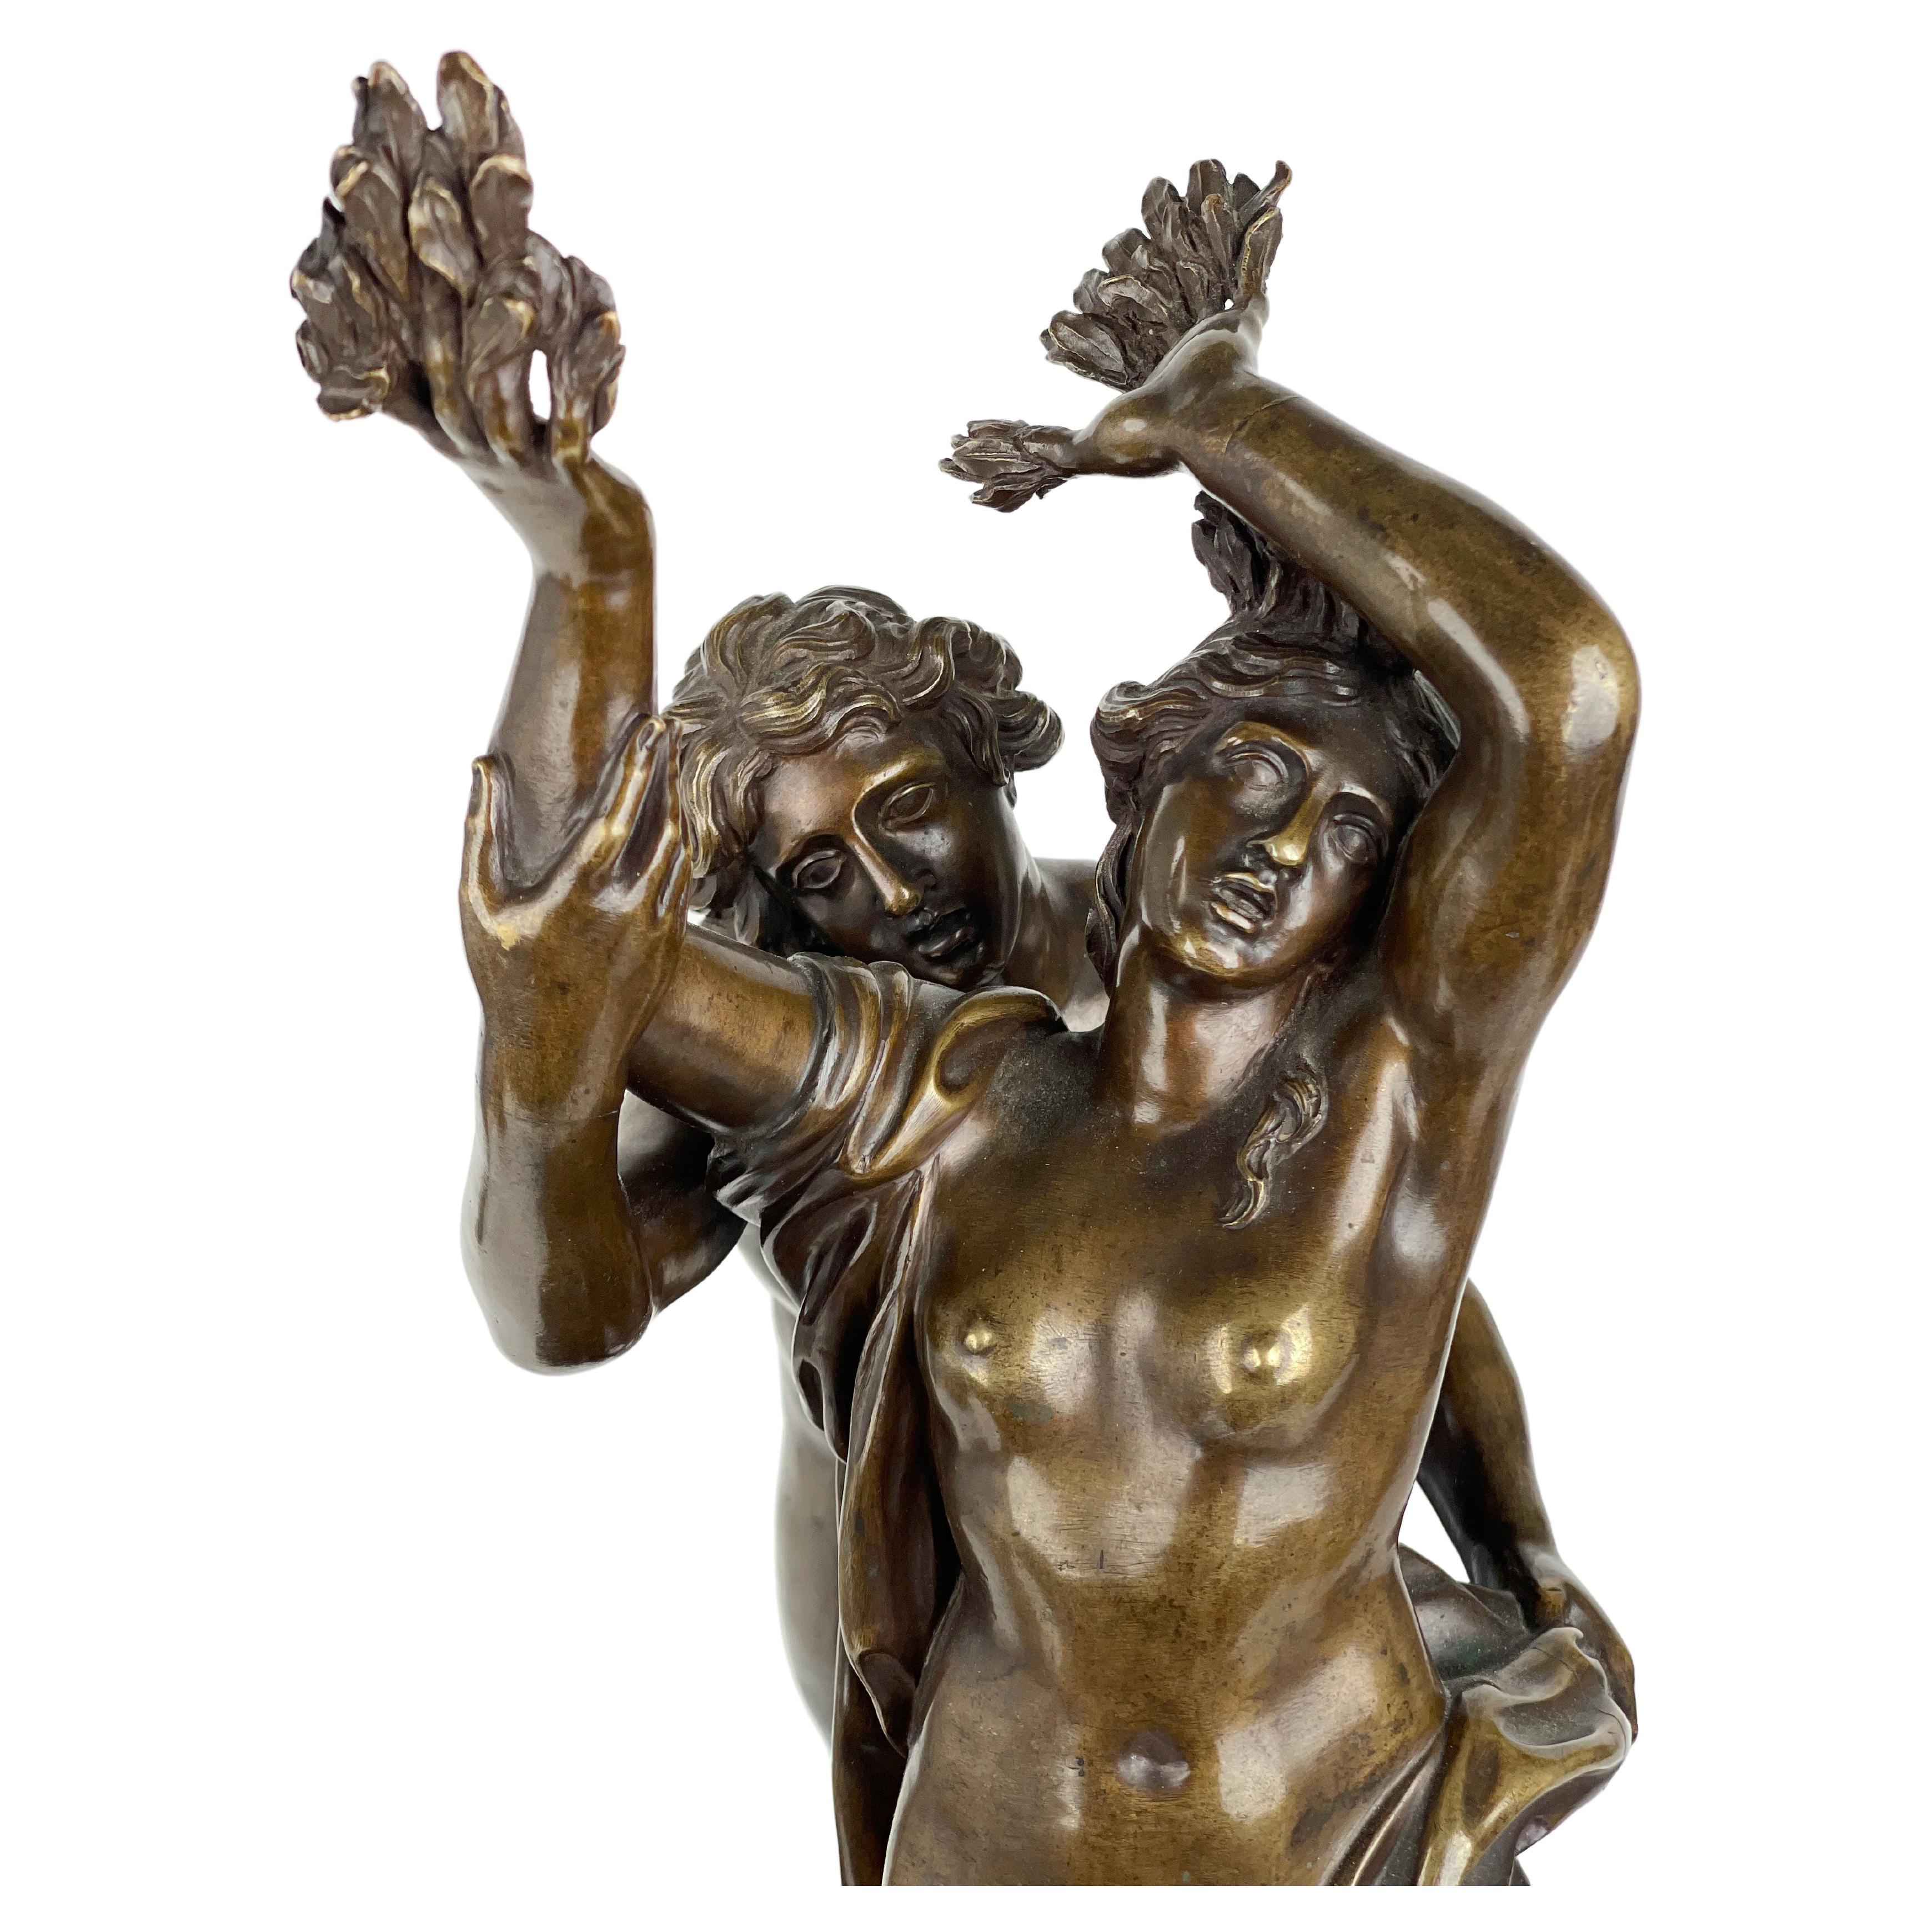 | Century at 18th 1stDibs century of Patinated Group joinville Apollo and Daphne group Sale For Bronze